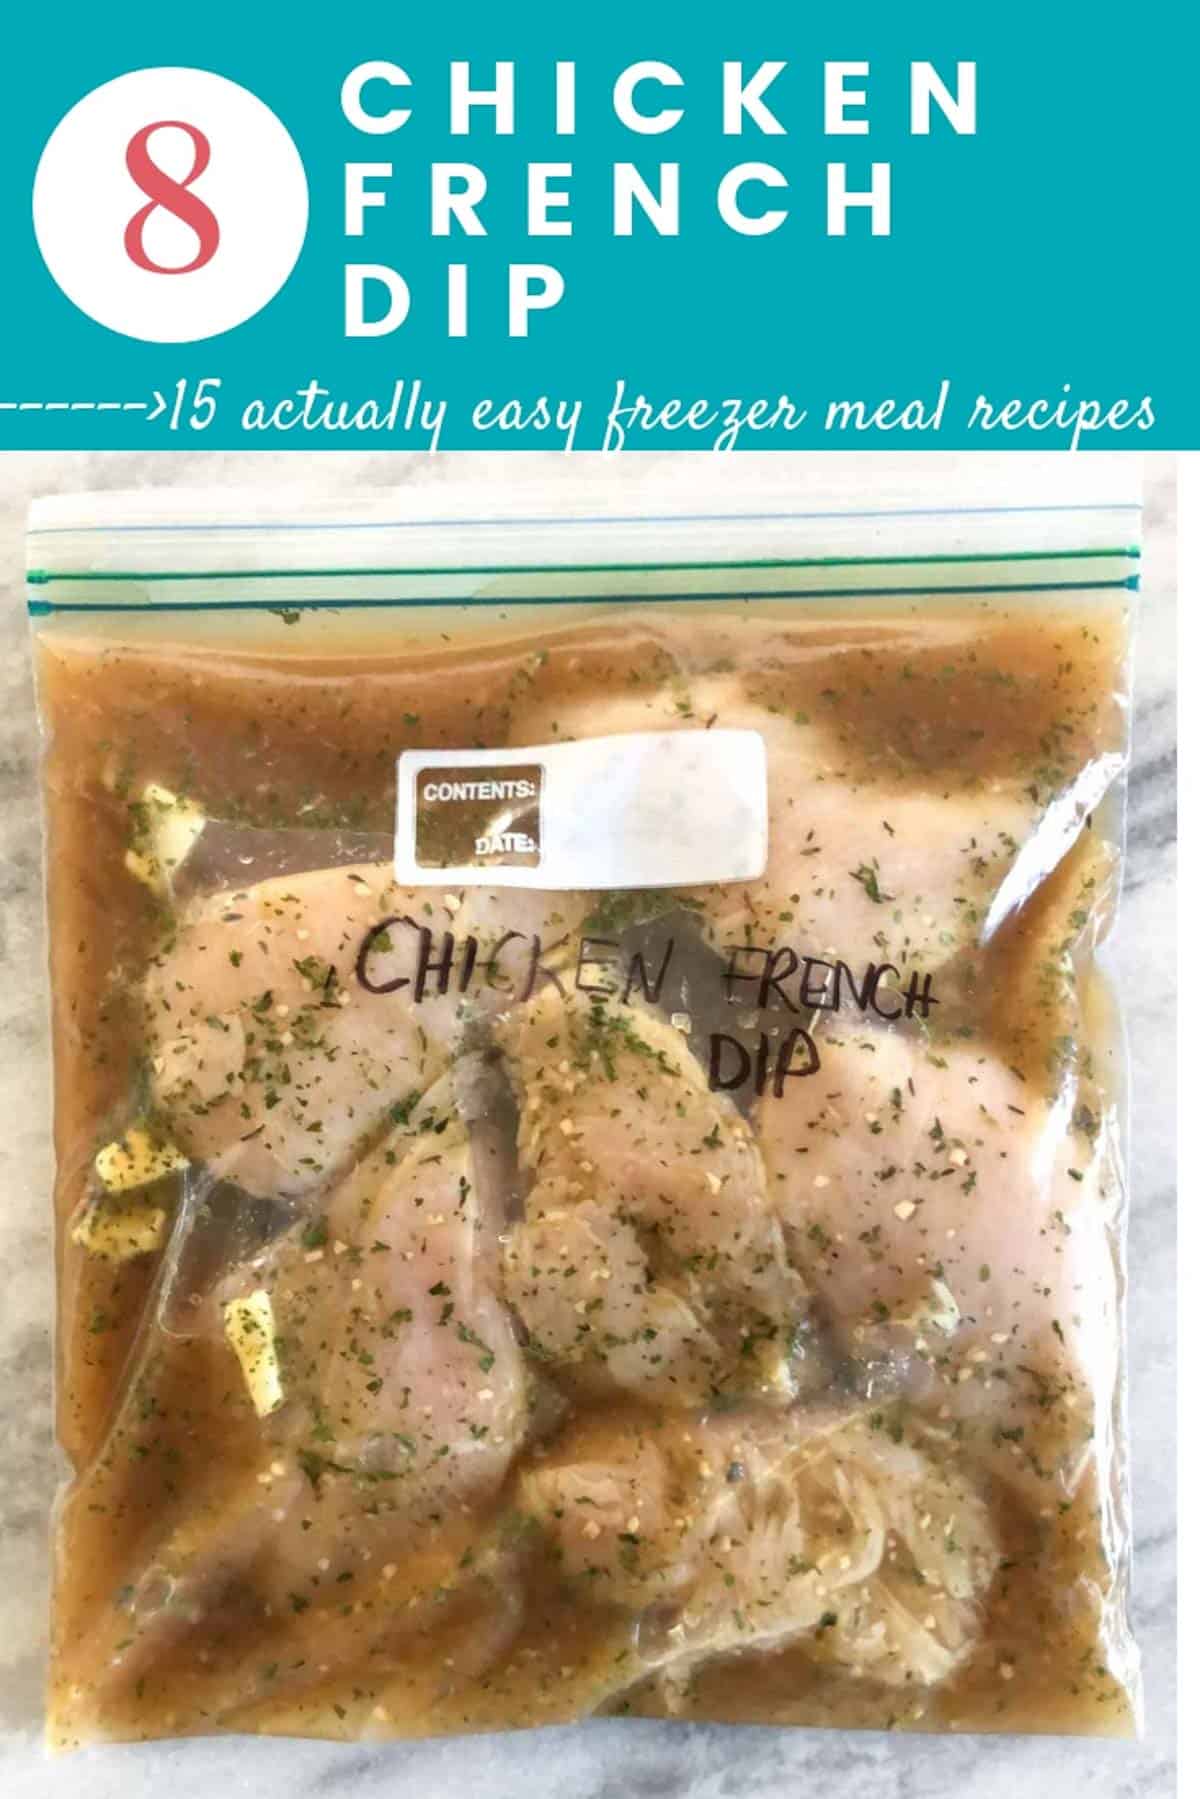 Easy freezer Meals Chicken French Dip freezer meal in bag